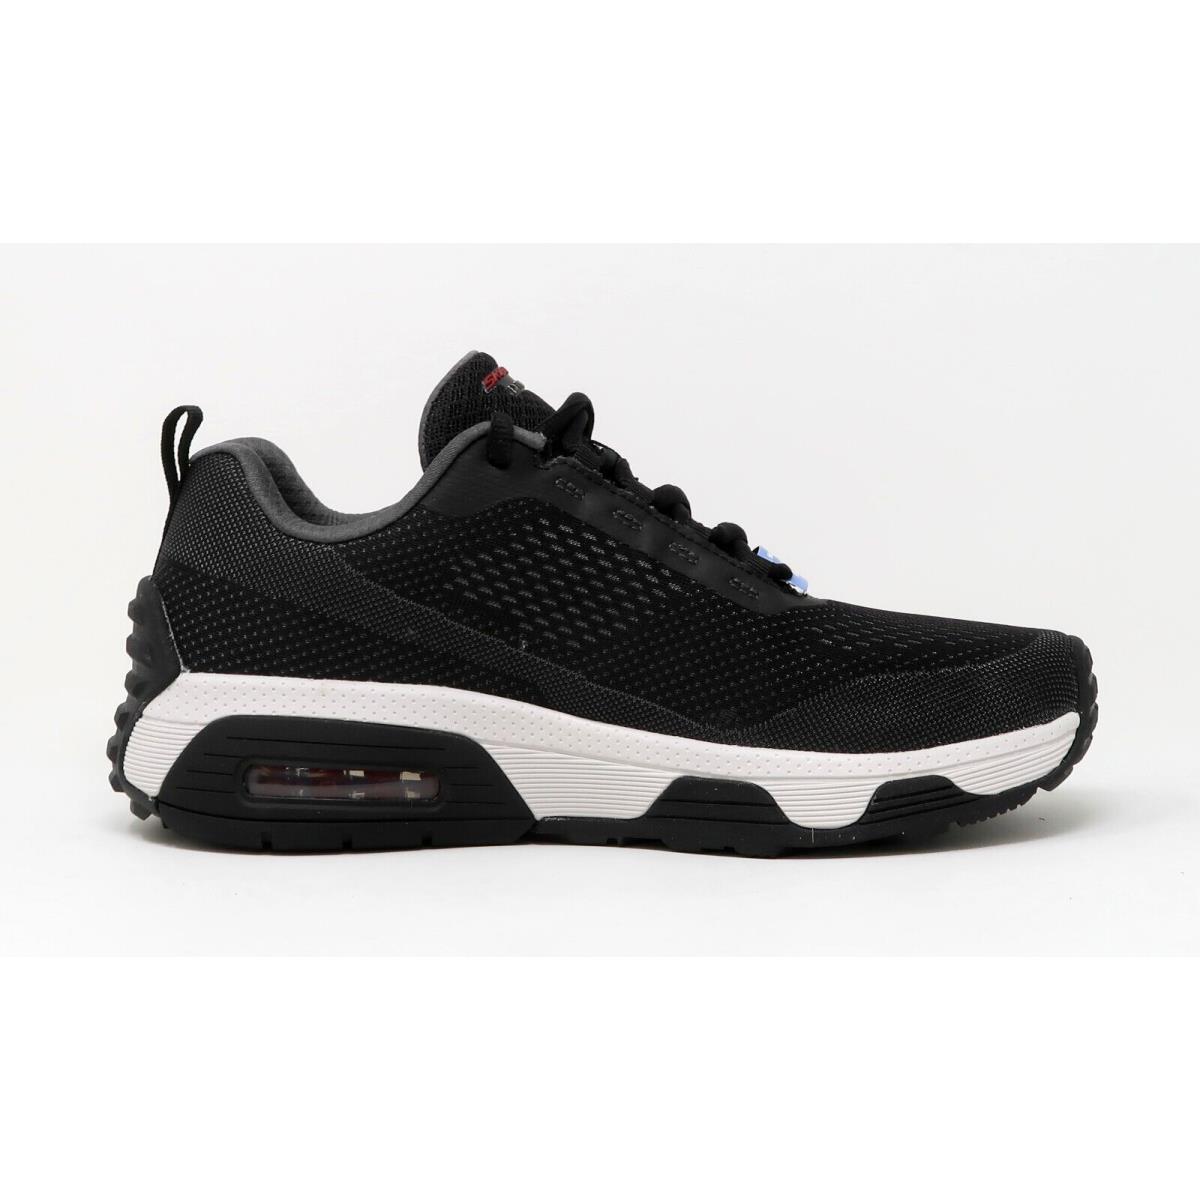 Skechers shoes Extreme - Black 0